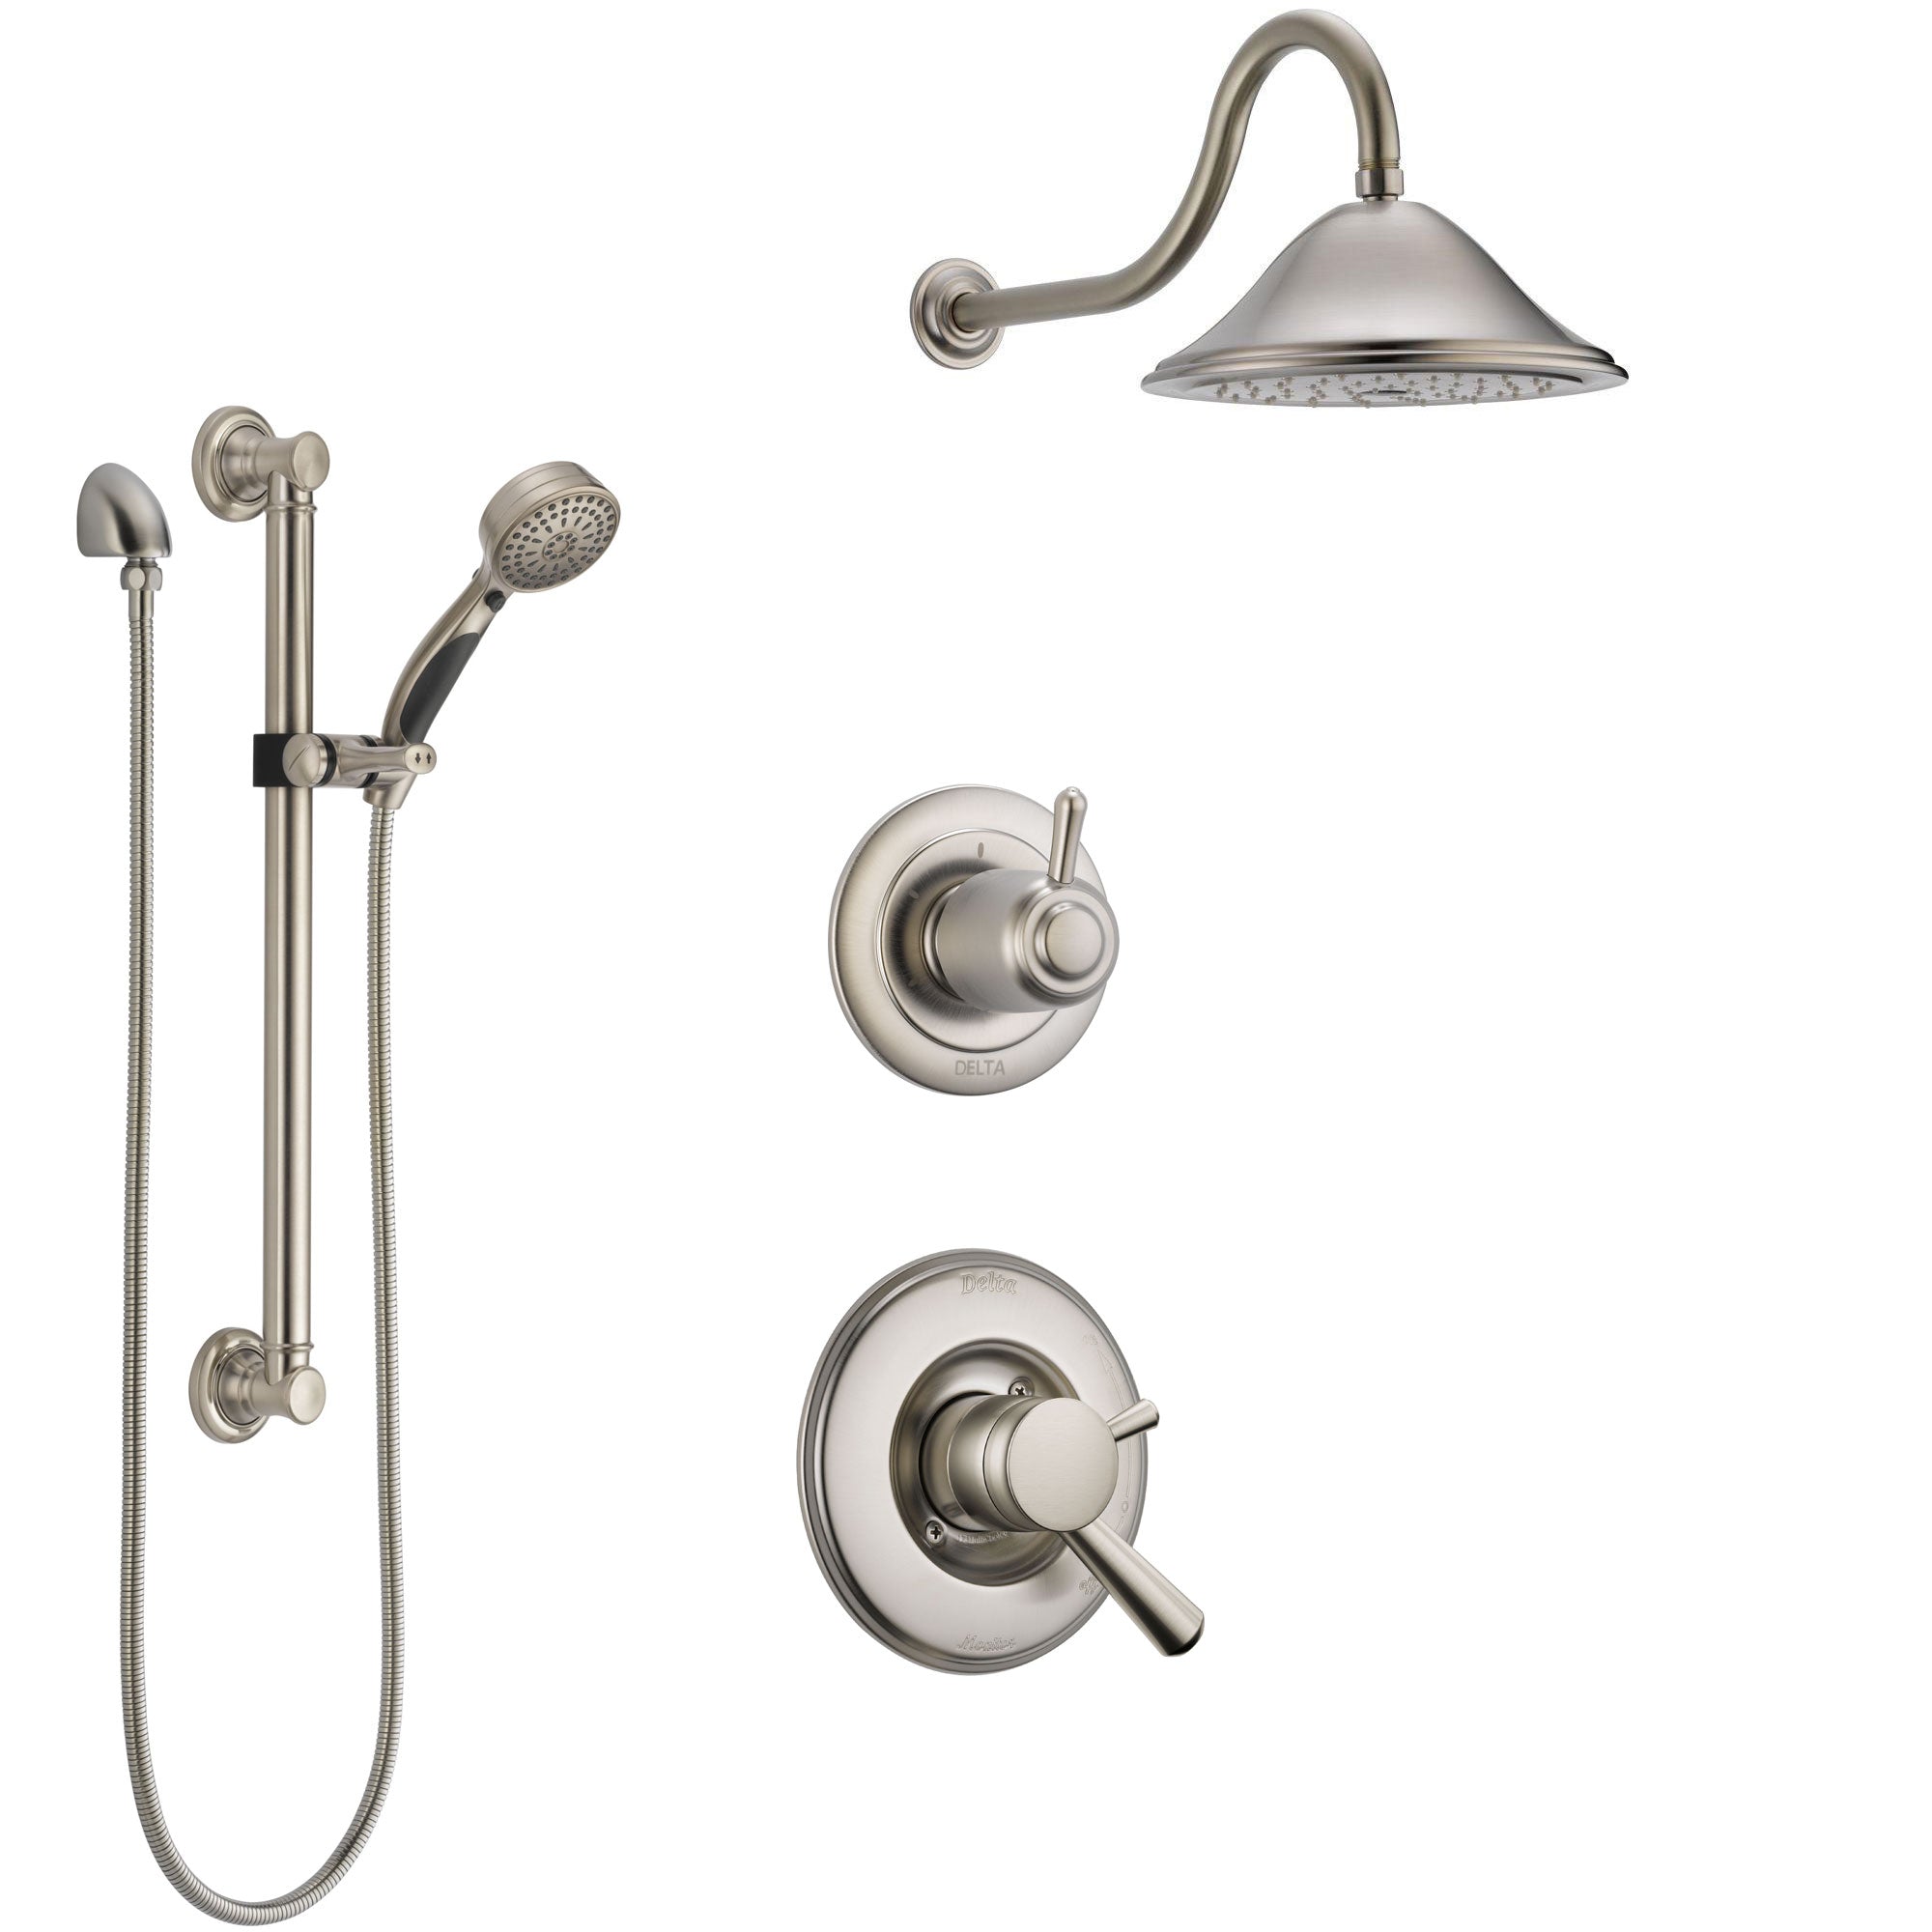 Delta Linden Stainless Steel Finish Shower System with Dual Control Handle, 3-Setting Diverter, Showerhead, and Hand Shower with Grab Bar SS1793SS2